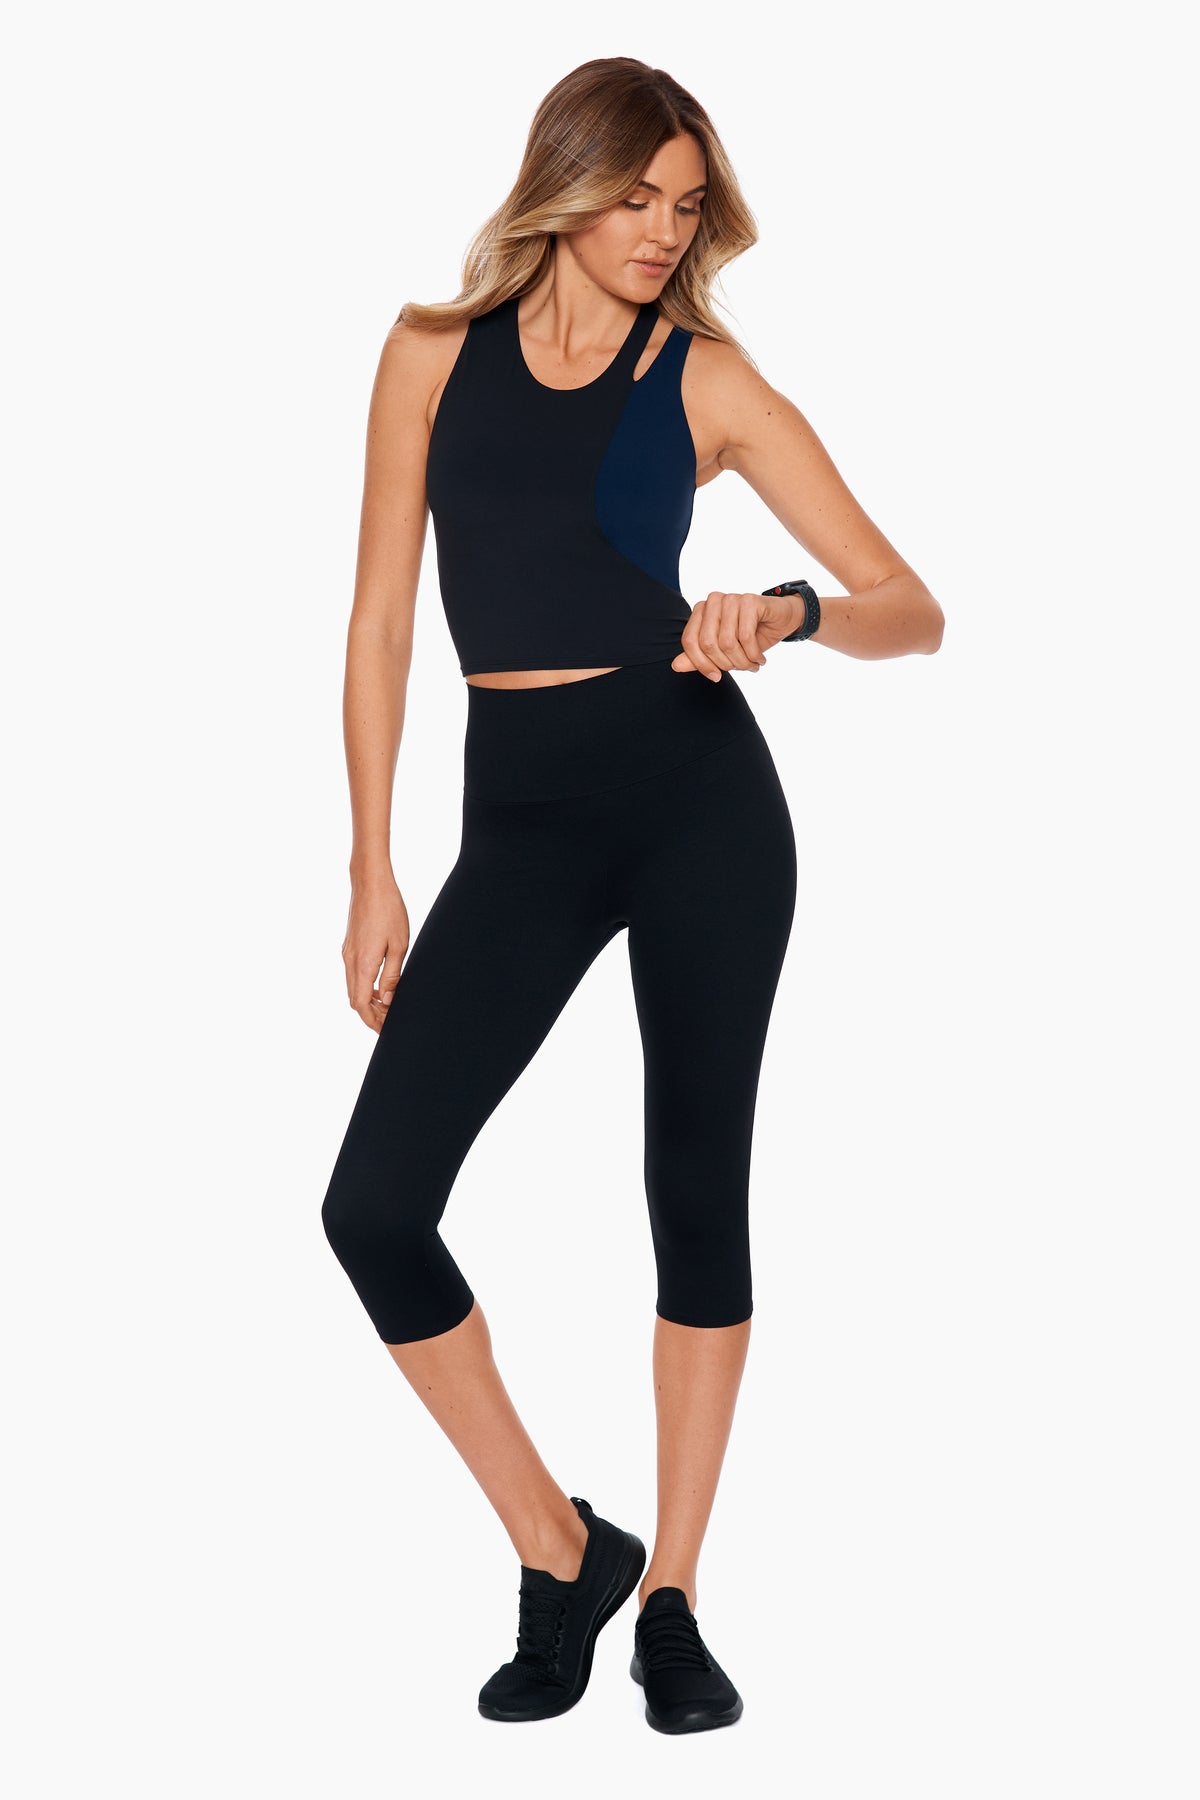 Miraclesuit Navy Stitch Tummy Control Performance Leggings